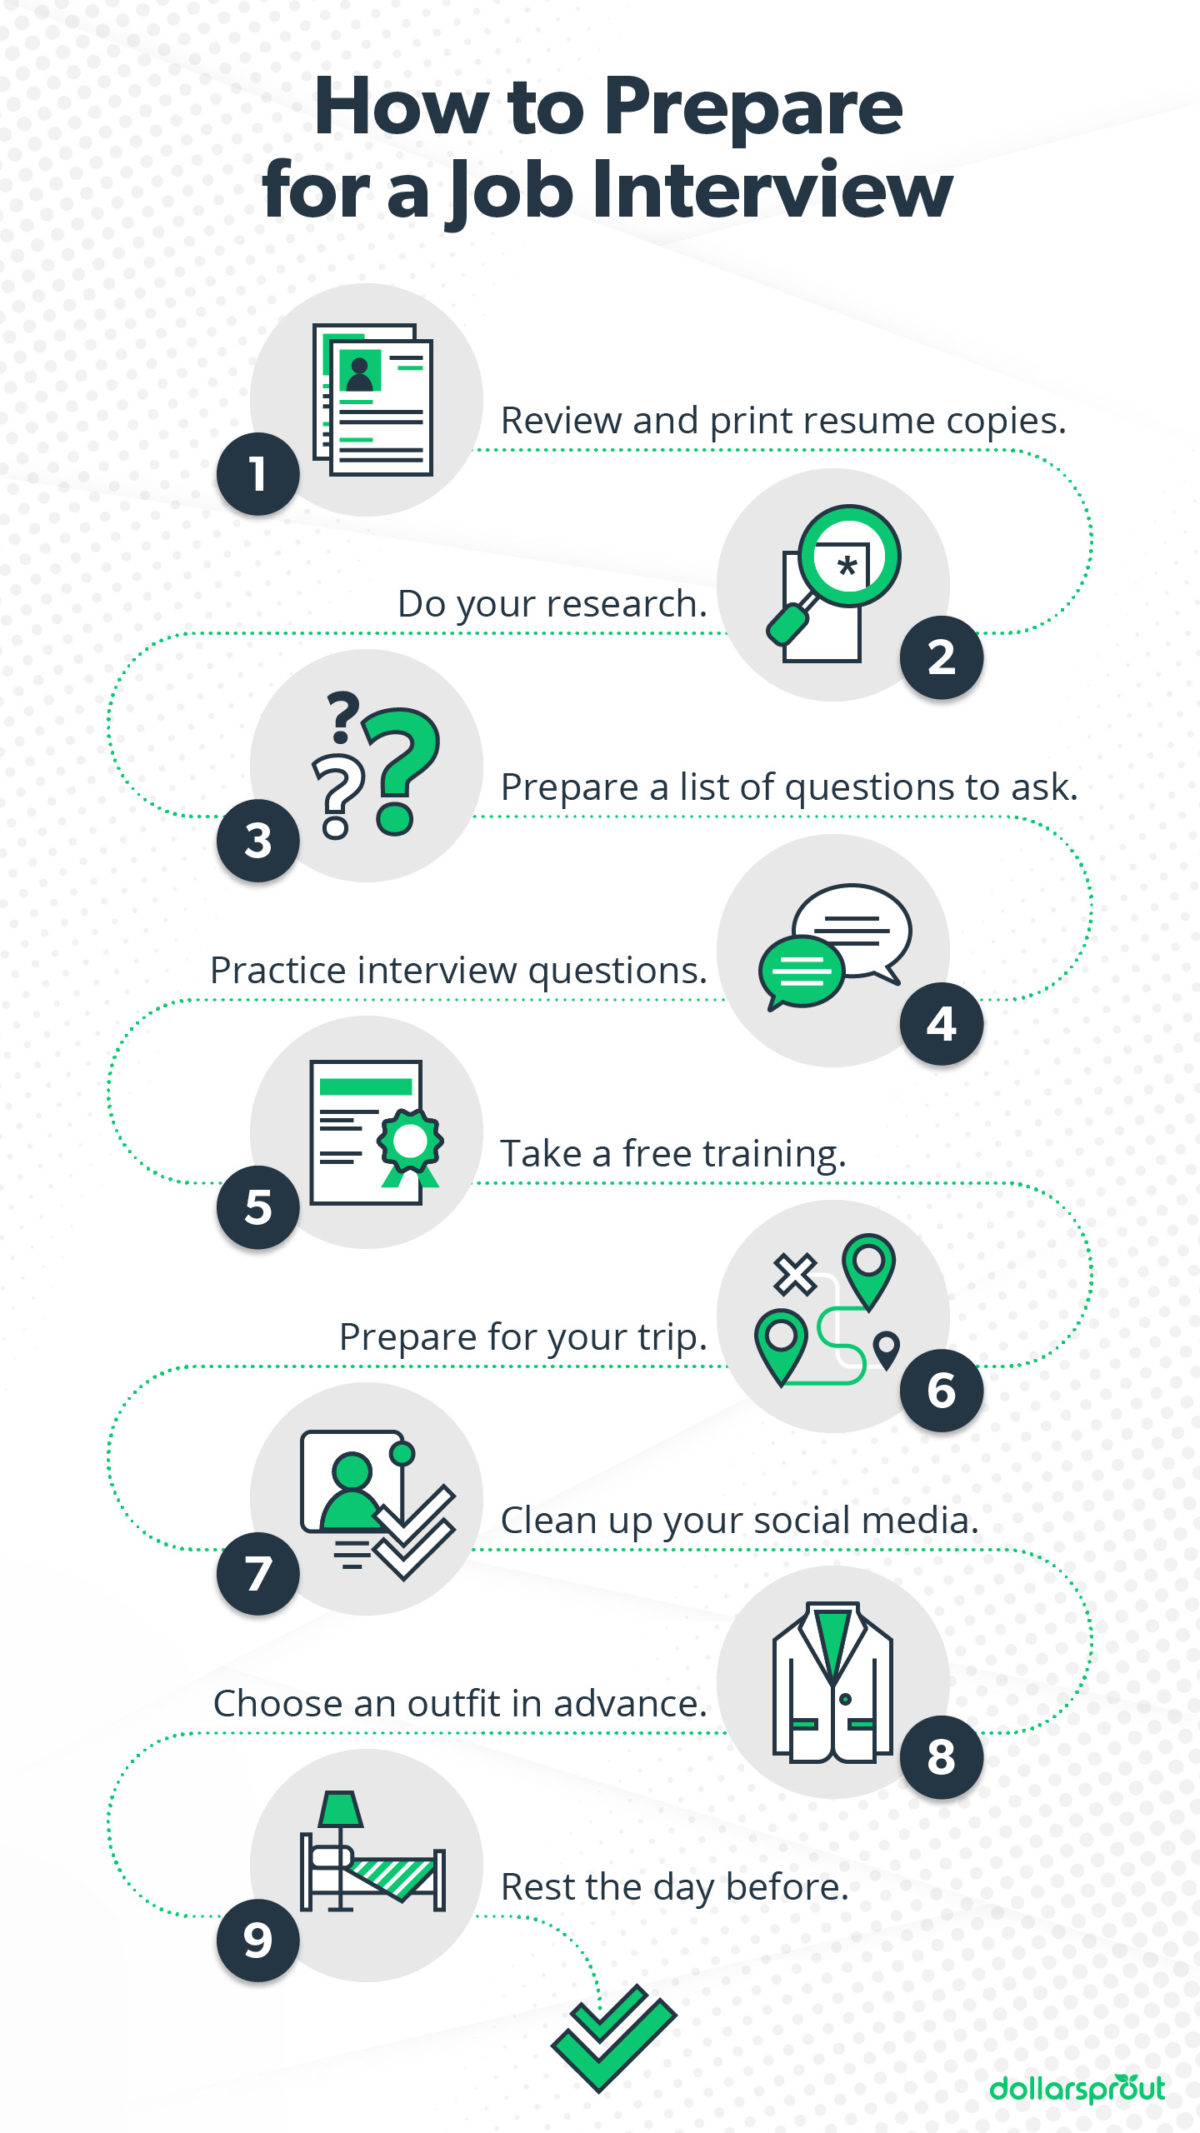 How to Prepare for a Job Interview Infographic